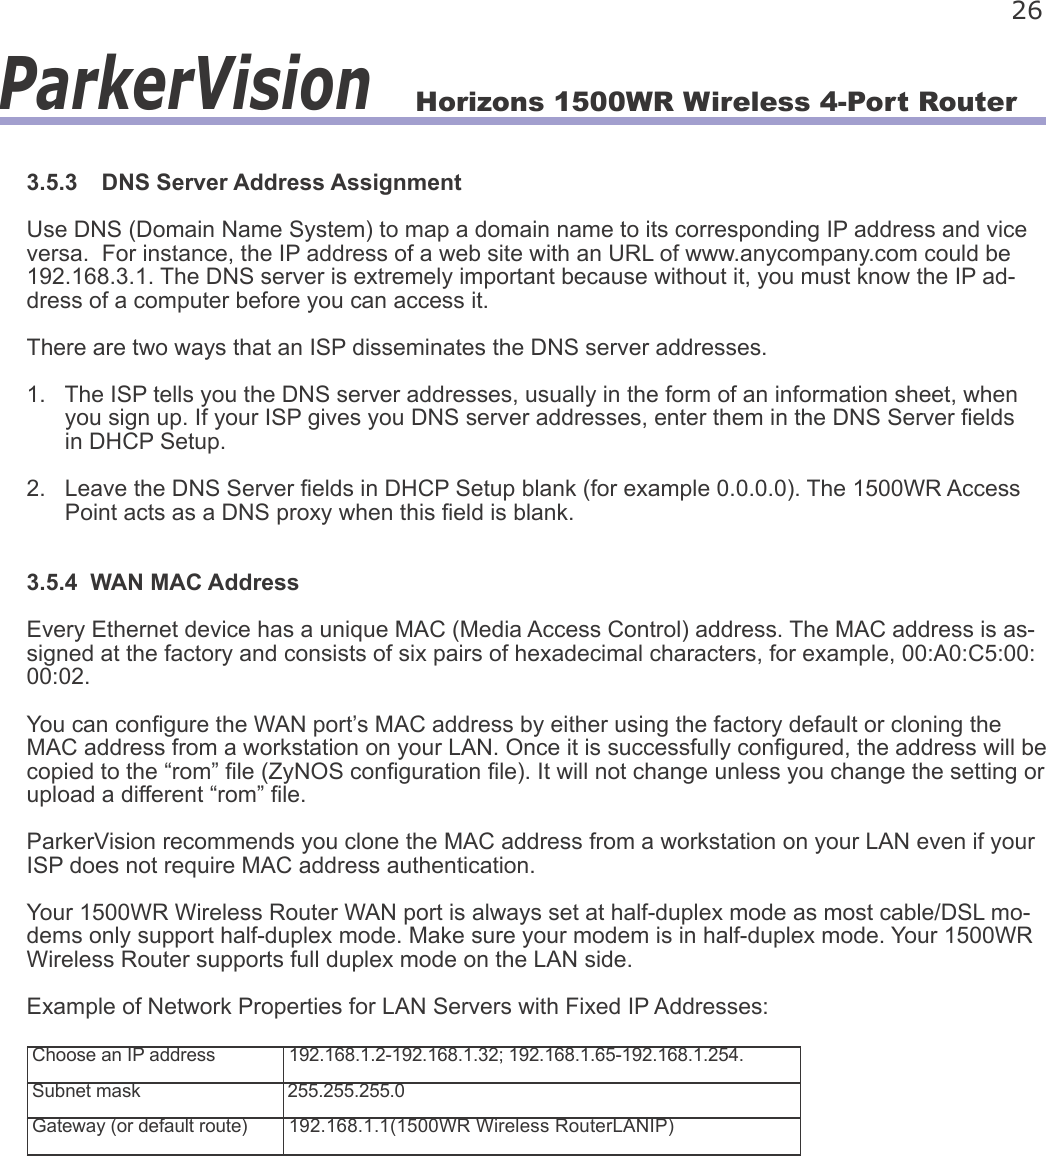 Horizons 1500WR Wireless 4-Port Router 26ParkerVision3.5.3  DNS Server Address AssignmentUse DNS (Domain Name System) to map a domain name to its corresponding IP address and vice versa.  For instance, the IP address of a web site with an URL of www.anycompany.com could be 192.168.3.1. The DNS server is extremely important because without it, you must know the IP ad-dress of a computer before you can access it.There are two ways that an ISP disseminates the DNS server addresses.1.   The ISP tells you the DNS server addresses, usually in the form of an information sheet, when       you sign up. If your ISP gives you DNS server addresses, enter them in the DNS Server elds       in DHCP Setup.2.   Leave the DNS Server elds in DHCP Setup blank (for example 0.0.0.0). The 1500WR Access       Point acts as a DNS proxy when this eld is blank.3.5.4  WAN MAC AddressEvery Ethernet device has a unique MAC (Media Access Control) address. The MAC address is as-signed at the factory and consists of six pairs of hexadecimal characters, for example, 00:A0:C5:00:00:02.You can congure the WAN port’s MAC address by either using the factory default or cloning the MAC address from a workstation on your LAN. Once it is successfully congured, the address will be copied to the “rom” le (ZyNOS conguration le). It will not change unless you change the setting or upload a different “rom” le.ParkerVision recommends you clone the MAC address from a workstation on your LAN even if your ISP does not require MAC address authentication. Your 1500WR Wireless Router WAN port is always set at half-duplex mode as most cable/DSL mo-dems only support half-duplex mode. Make sure your modem is in half-duplex mode. Your 1500WR Wireless Router supports full duplex mode on the LAN side.Example of Network Properties for LAN Servers with Fixed IP Addresses:Choose an IP address 192.168.1.2-192.168.1.32; 192.168.1.65-192.168.1.254.Subnet mask 255.255.255.0Gateway (or default route) 192.168.1.1(1500WR Wireless RouterLANIP)